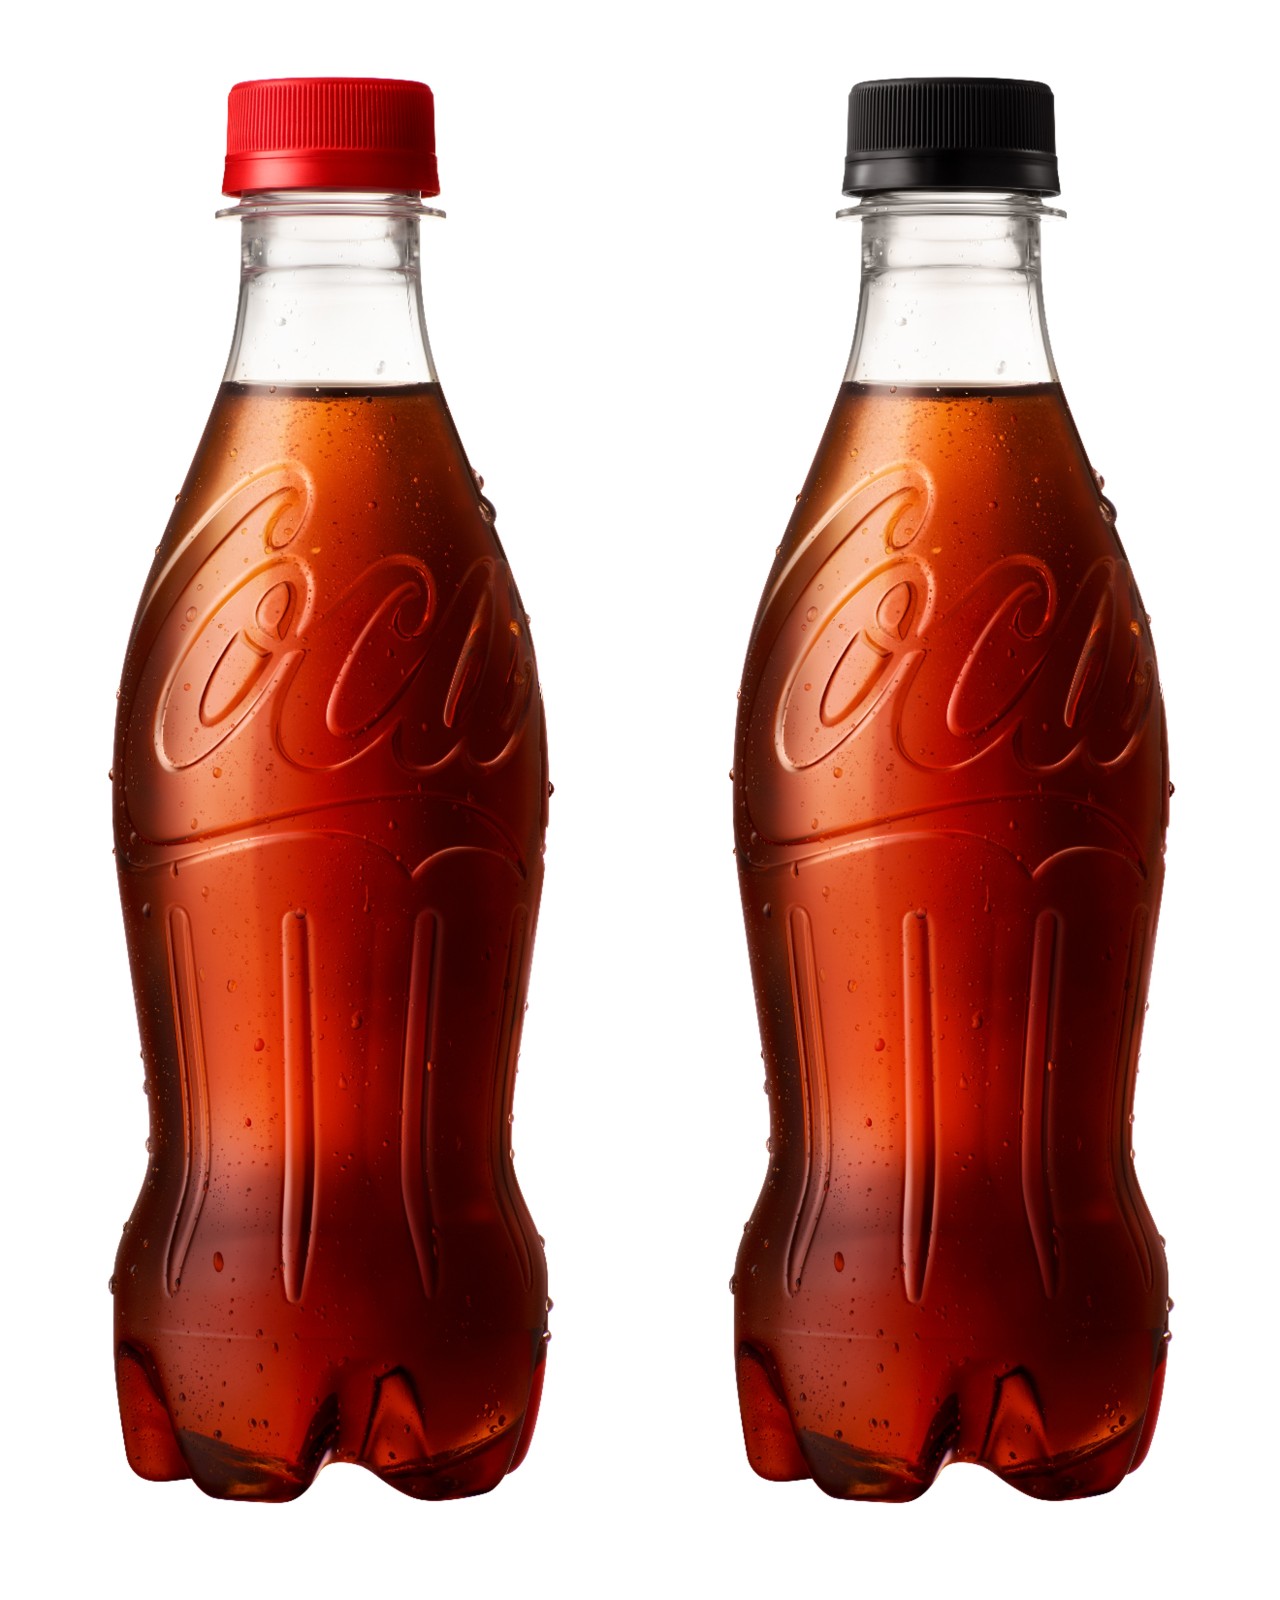 Coca-Cola’s newly designed plastic bottles without labels are to increase recycling efficiency. (Coca-Cola)